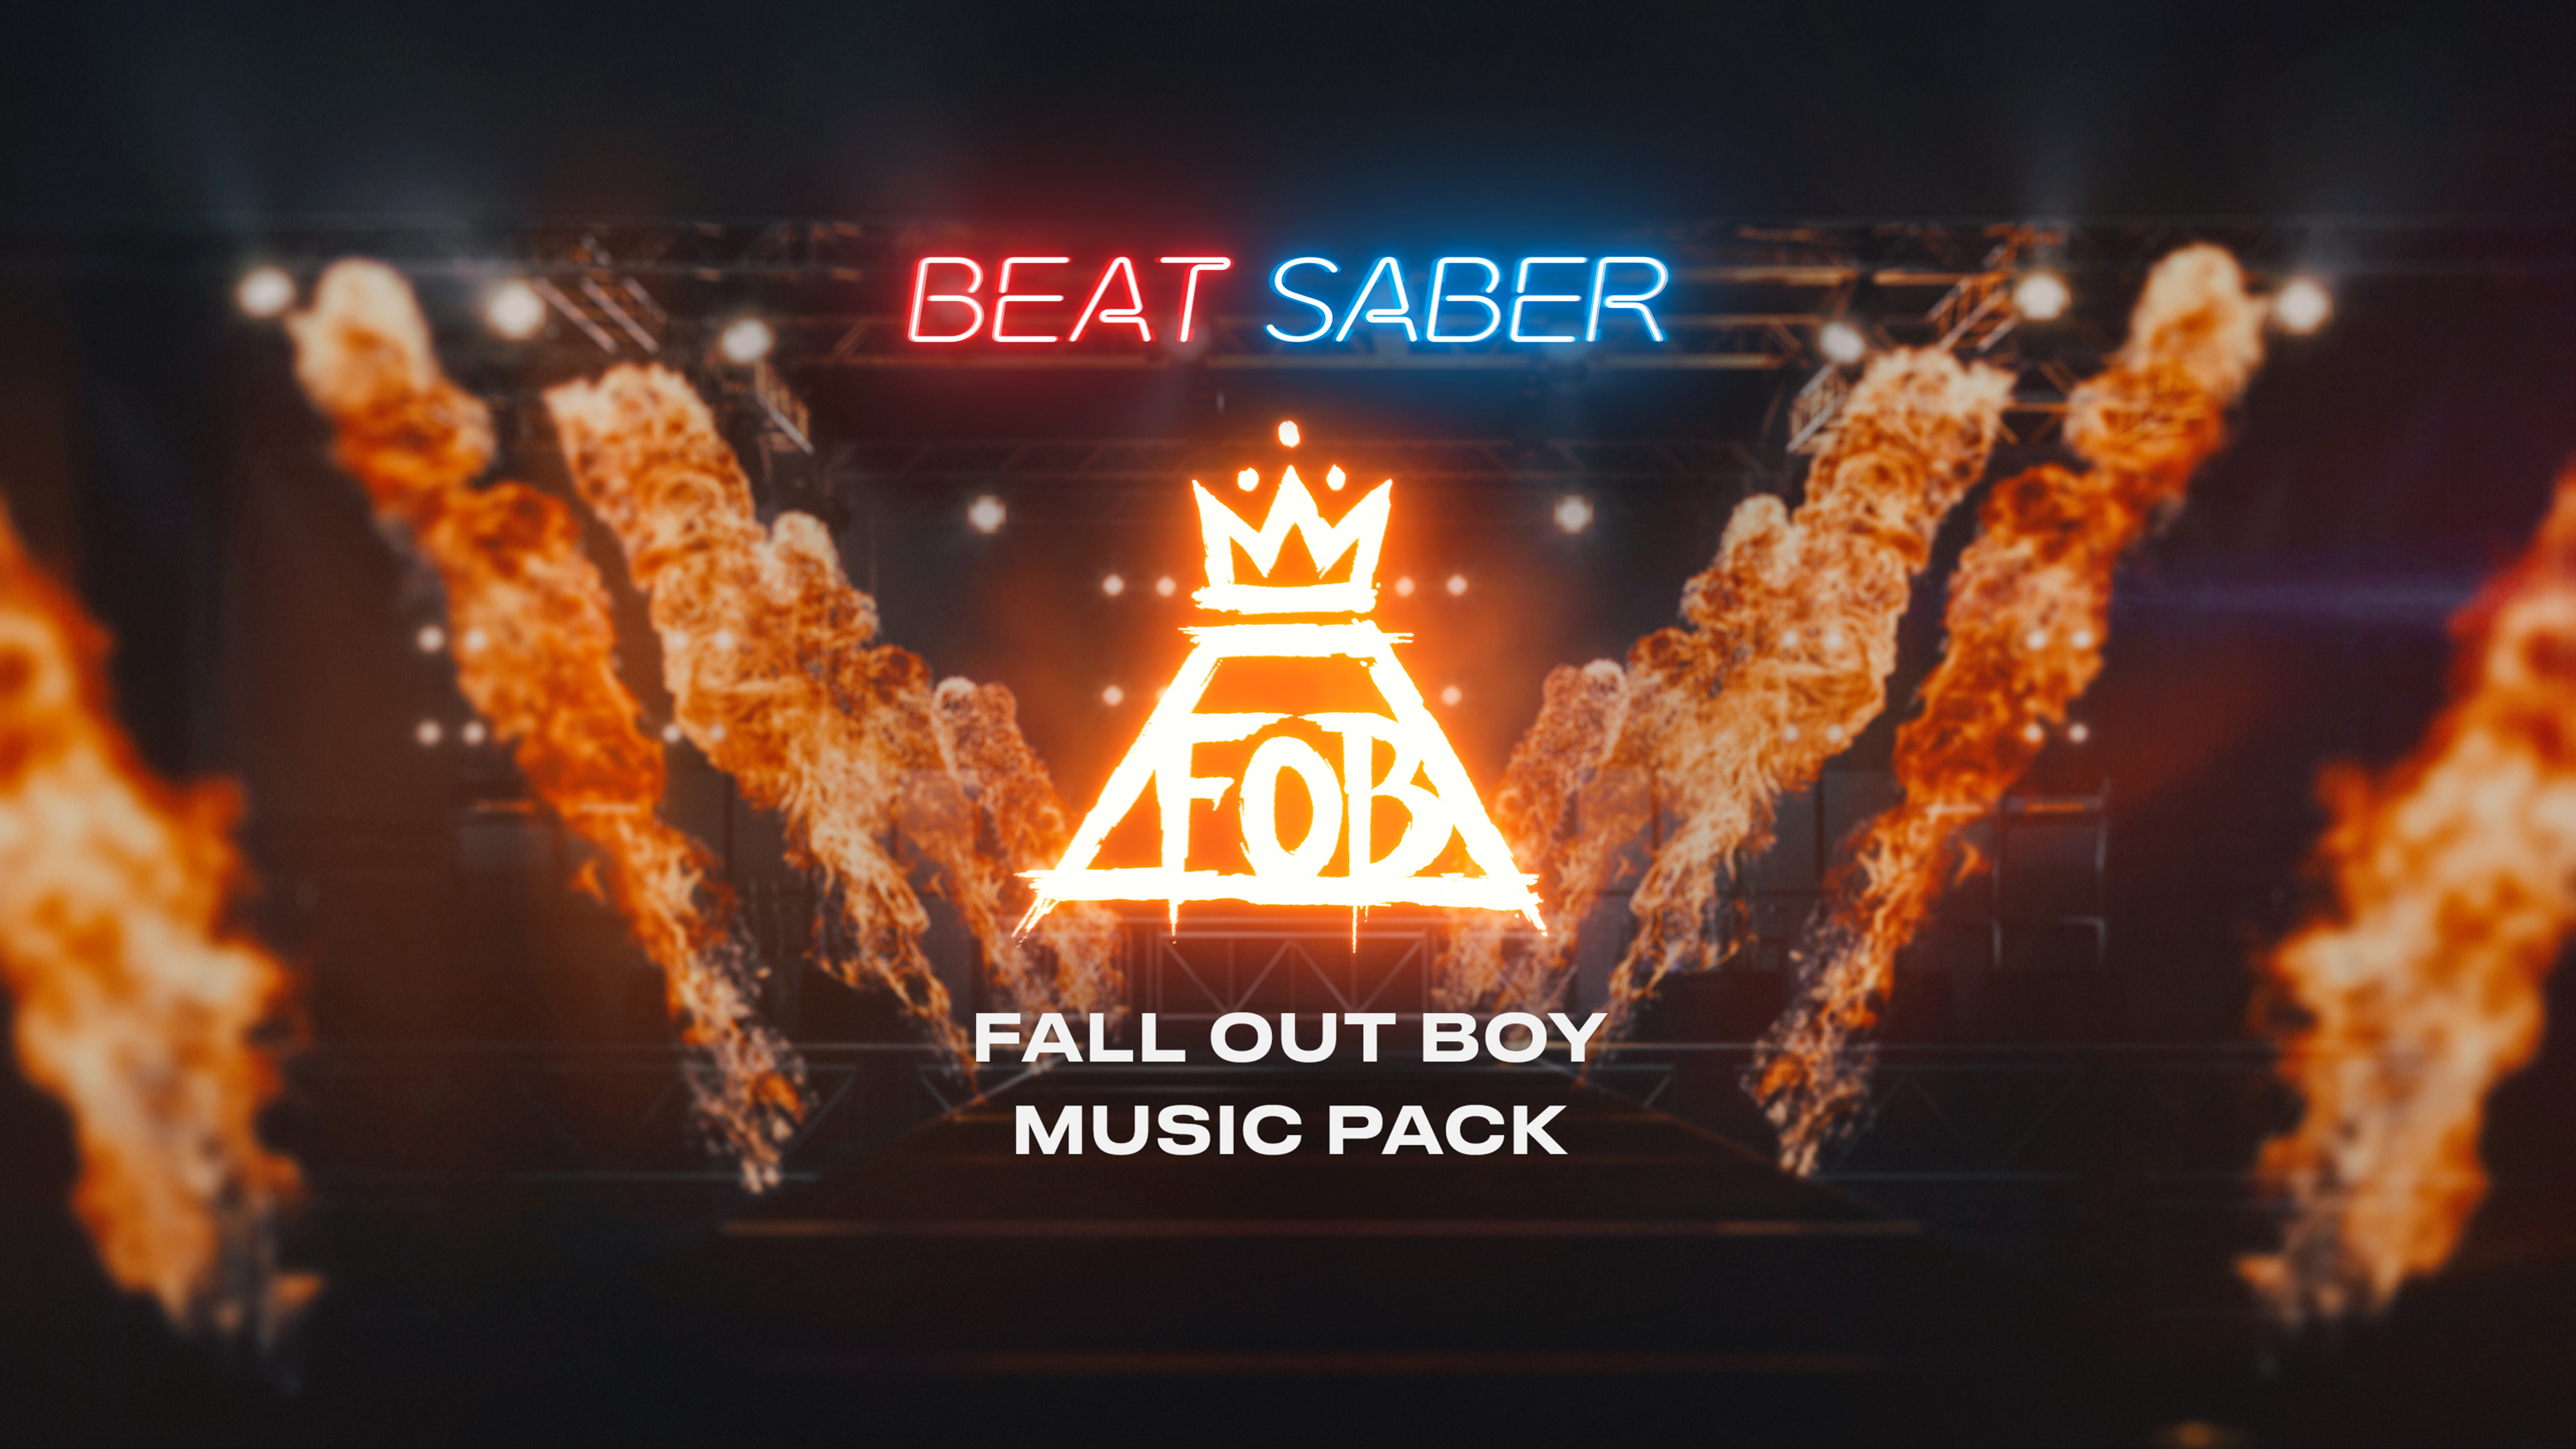 This ain't a scene, it's Fall Out Boy coming to Beat Saber on the Quest 2